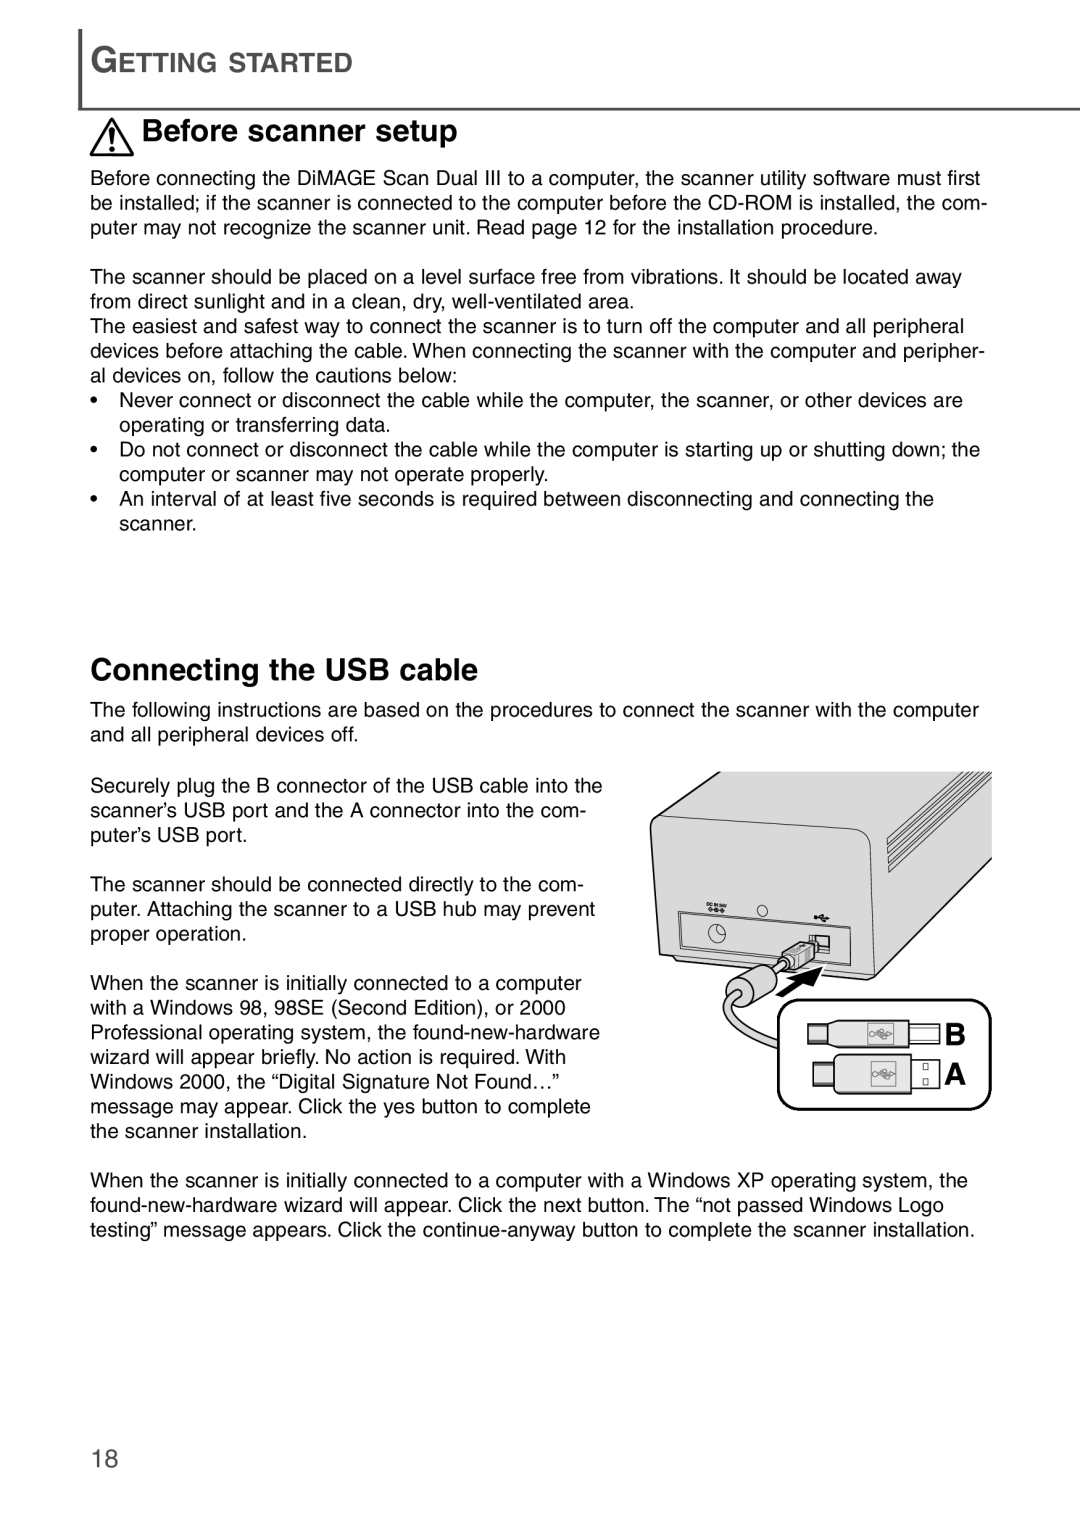 Konica Minolta AF-2840 instruction manual Before scanner setup, Connecting the USB cable, Getting Started 